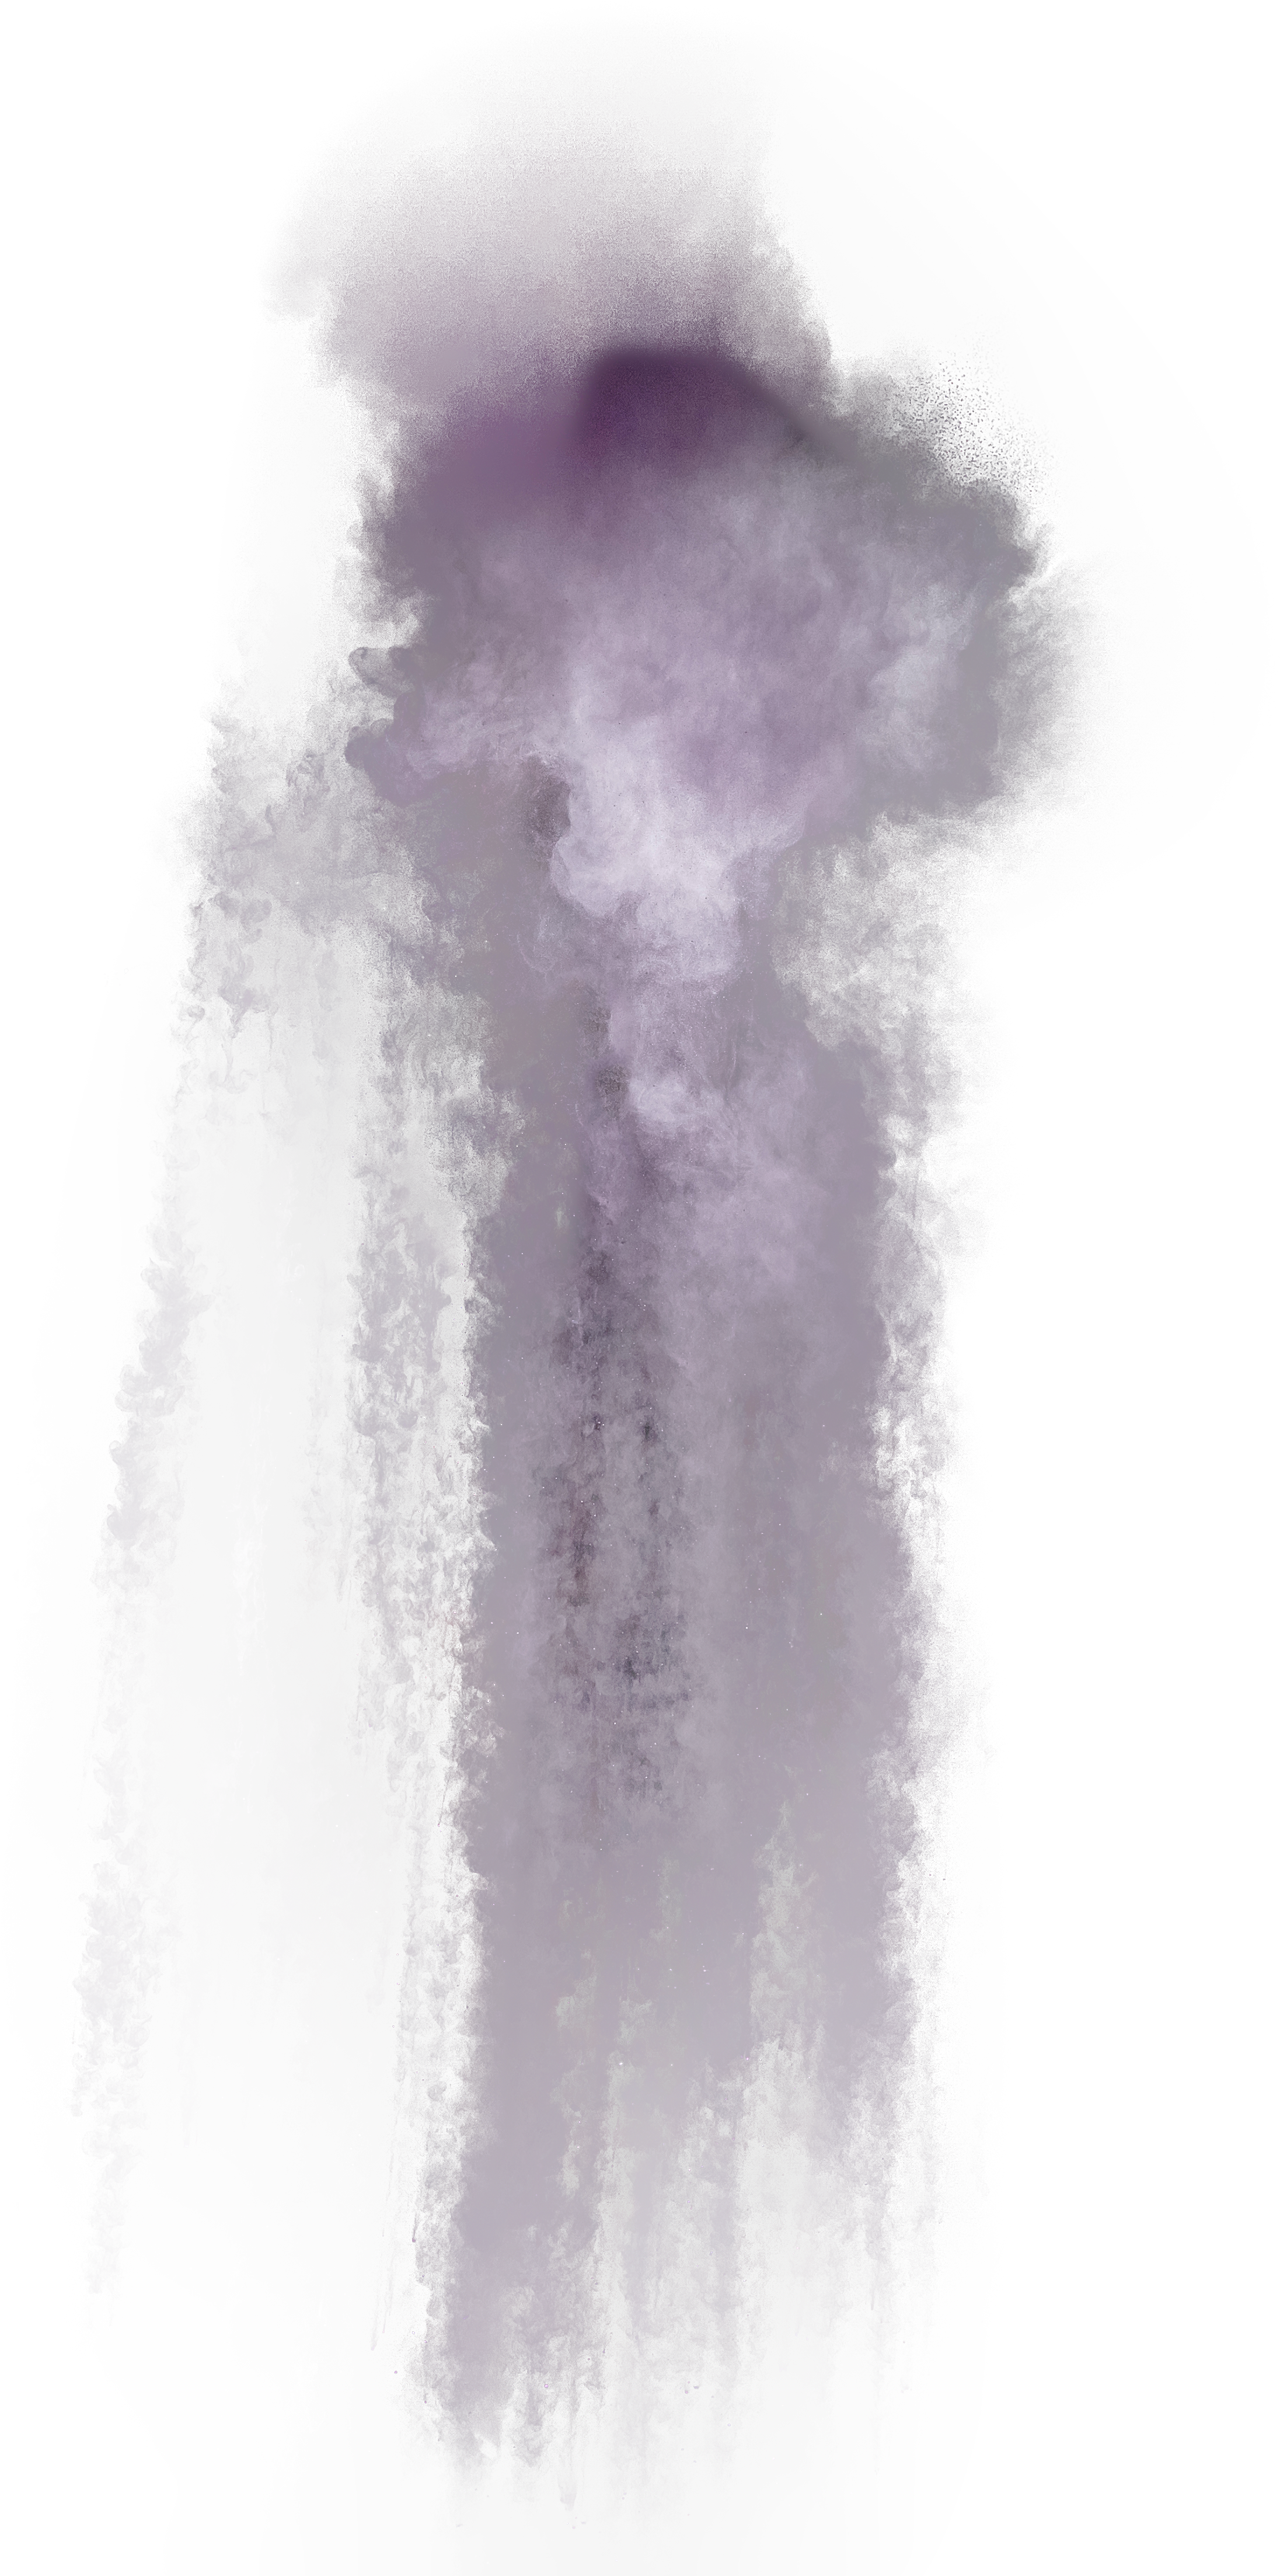 Google Explosion Purple Material Dust Powder Images PNG Image